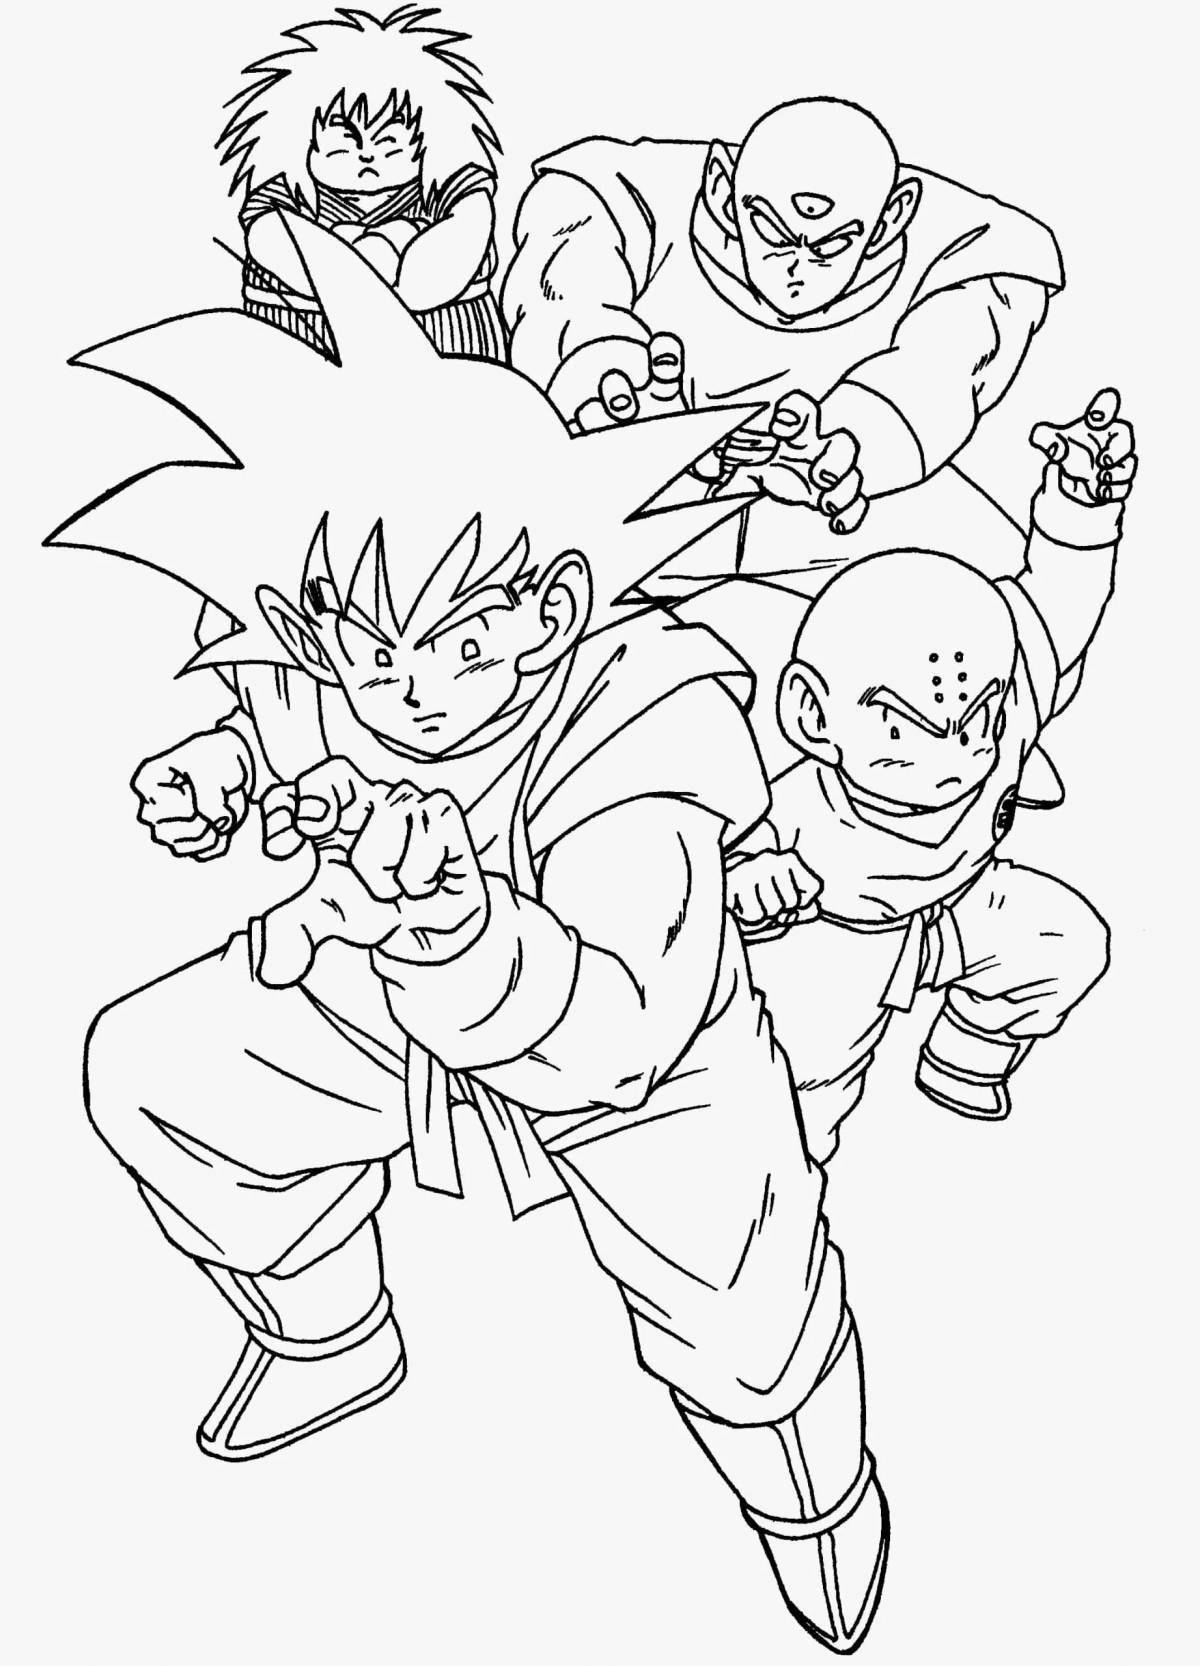 Goku fairy coloring page